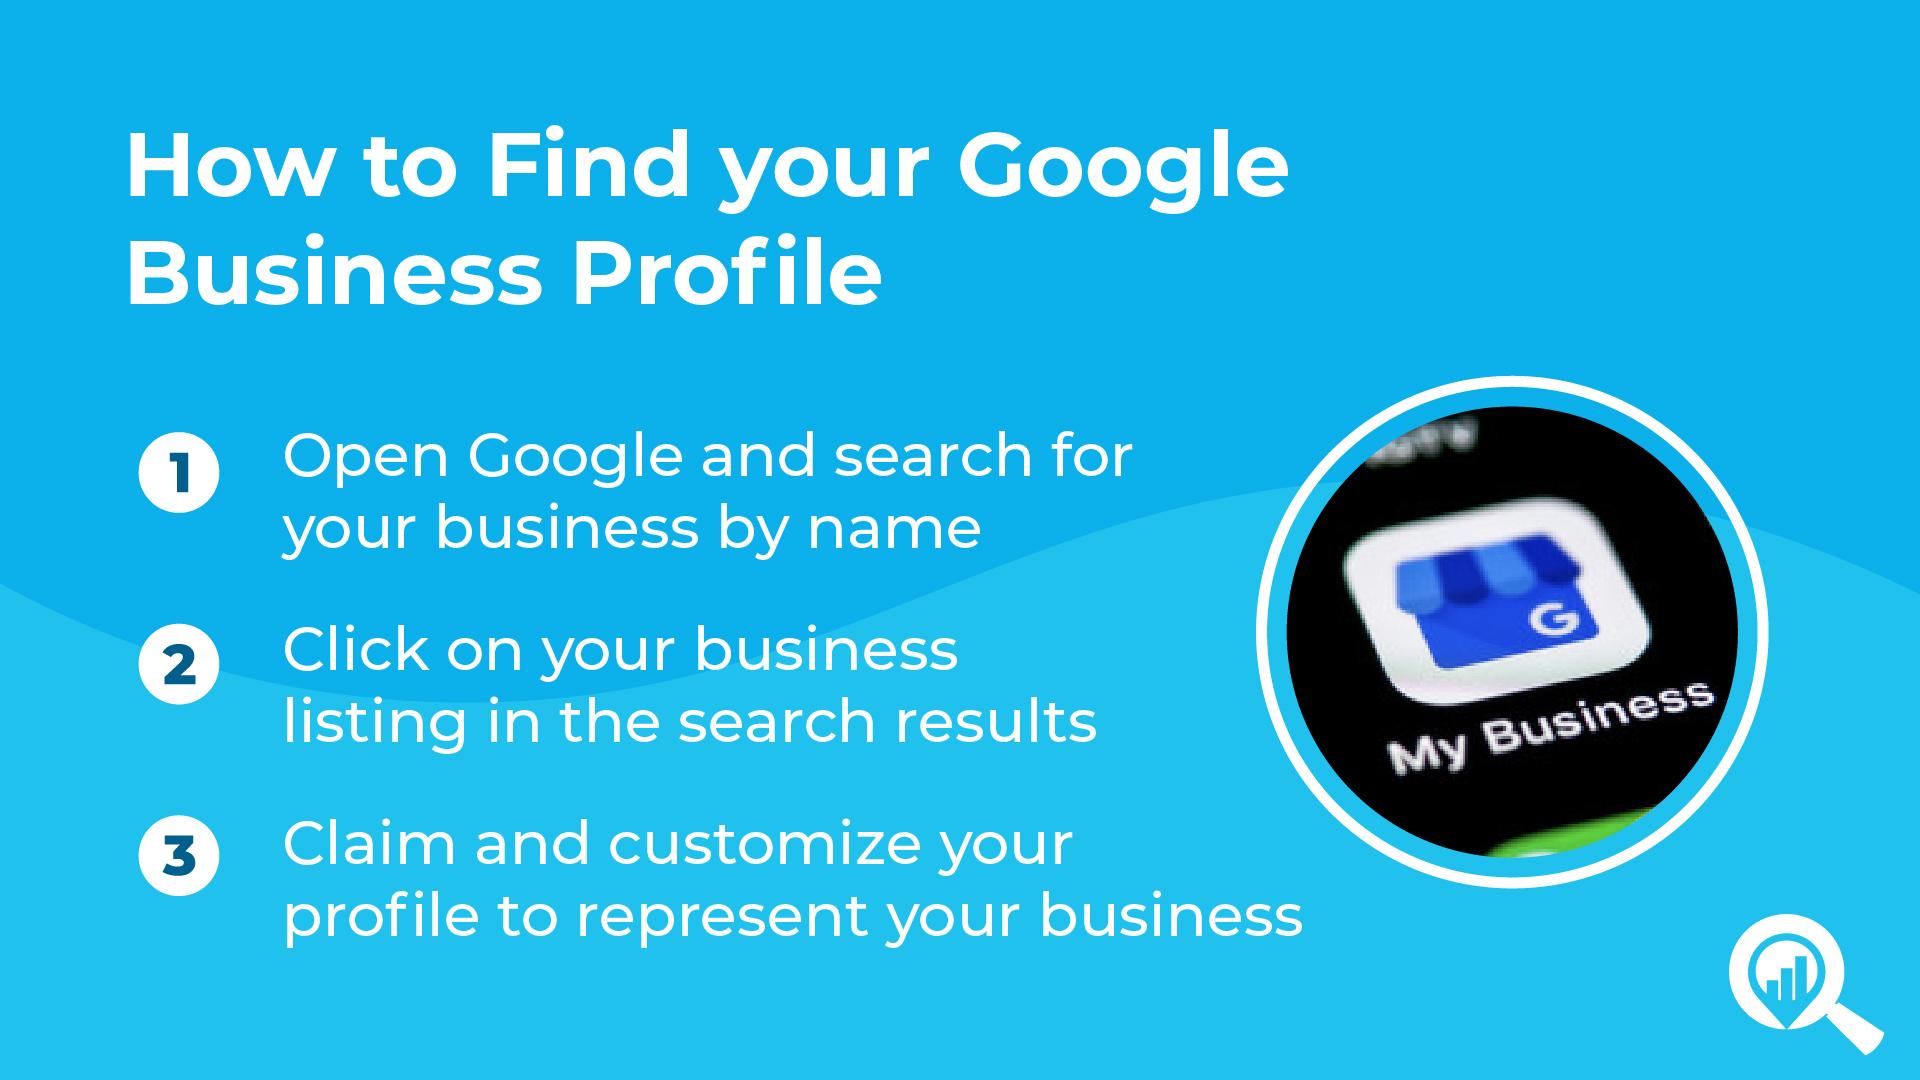 How to Find your Google Business Profile